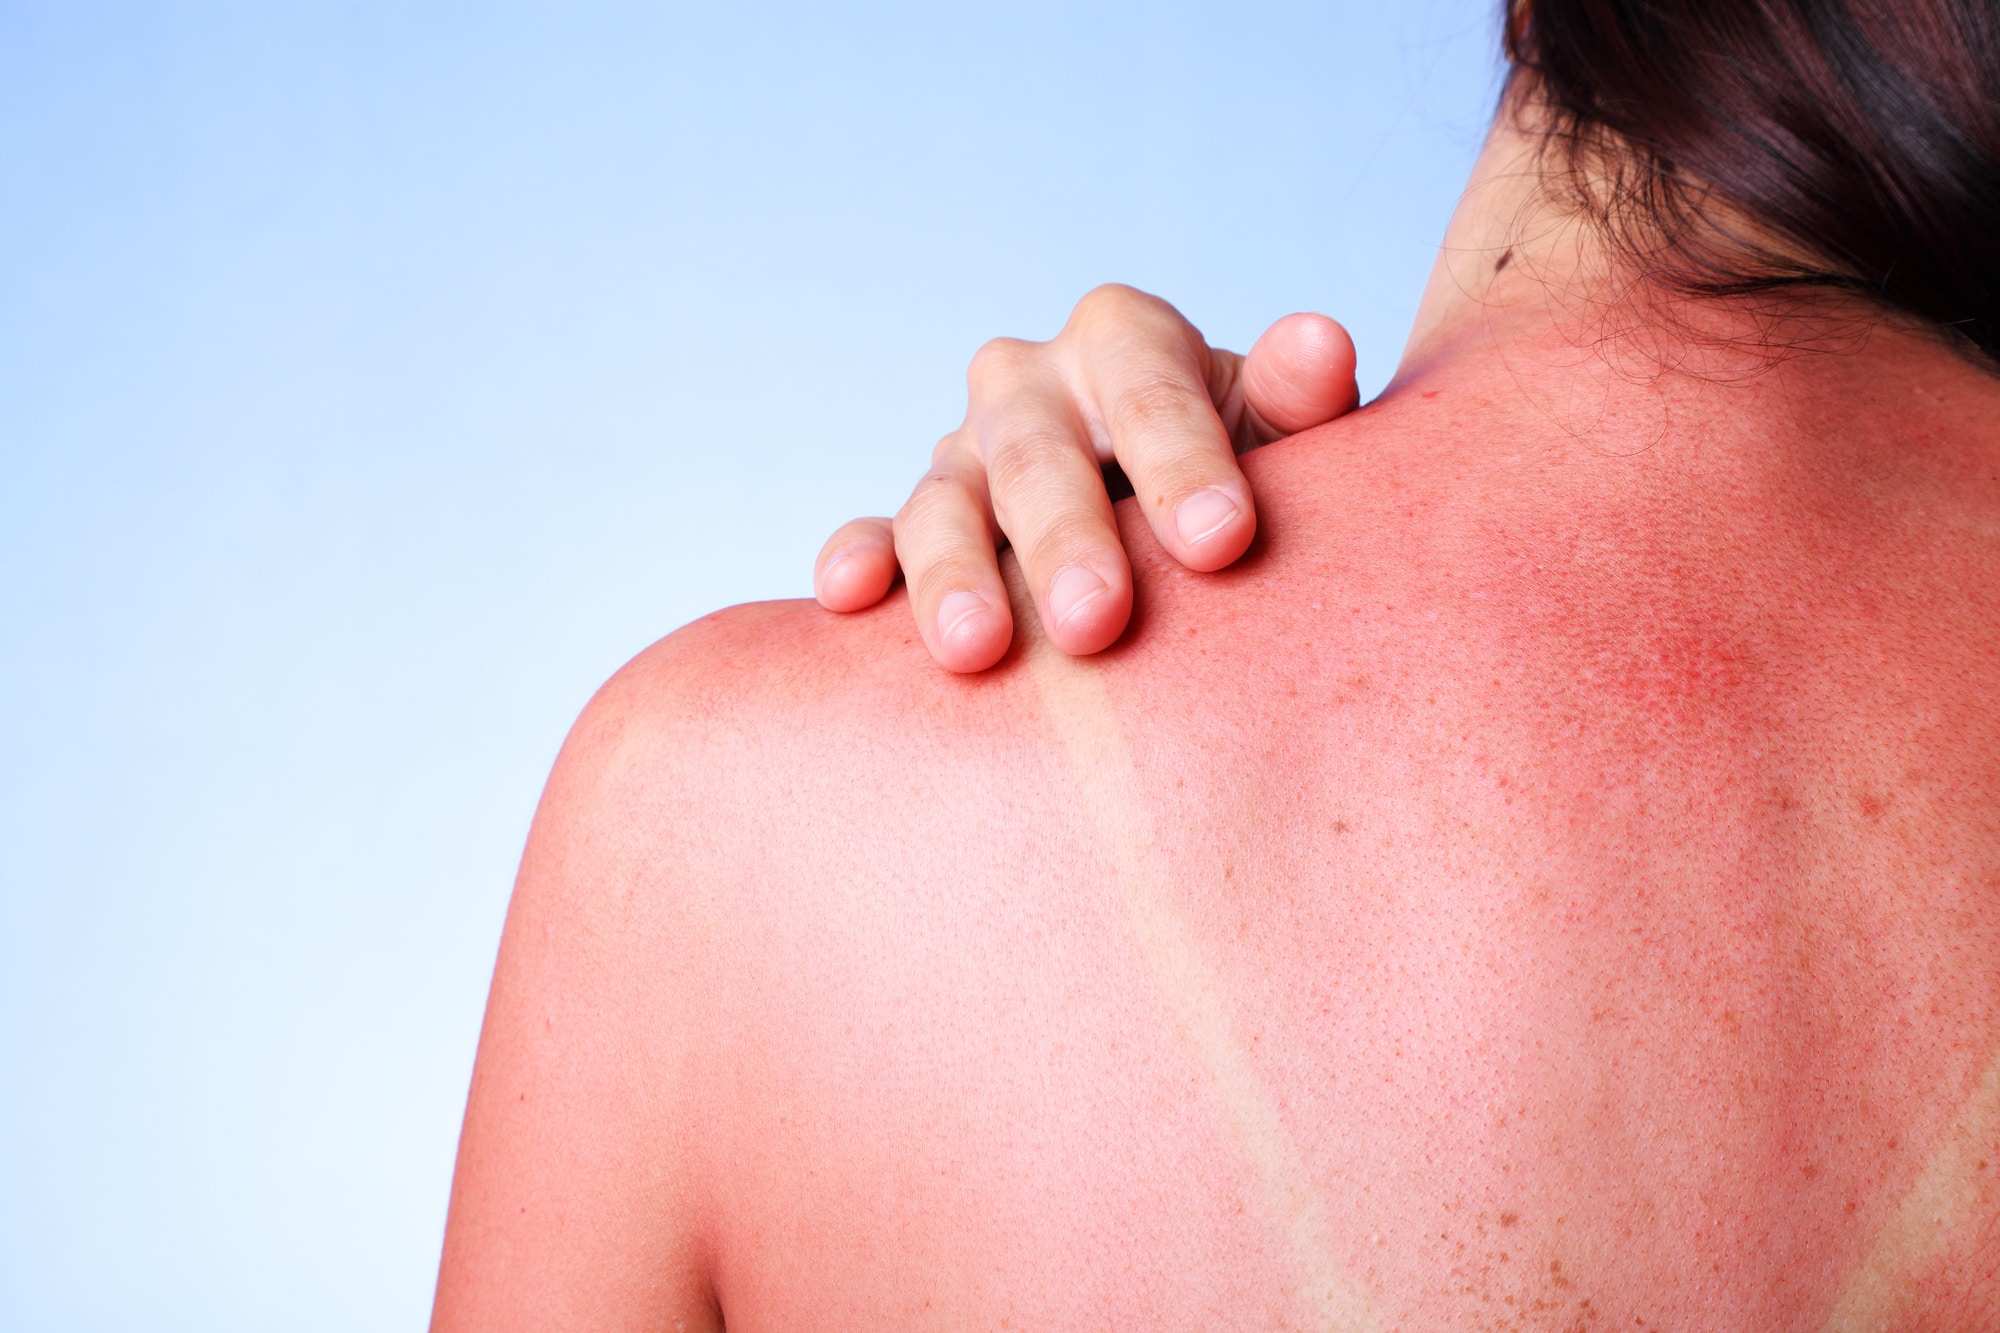 woman with severe sunburned back